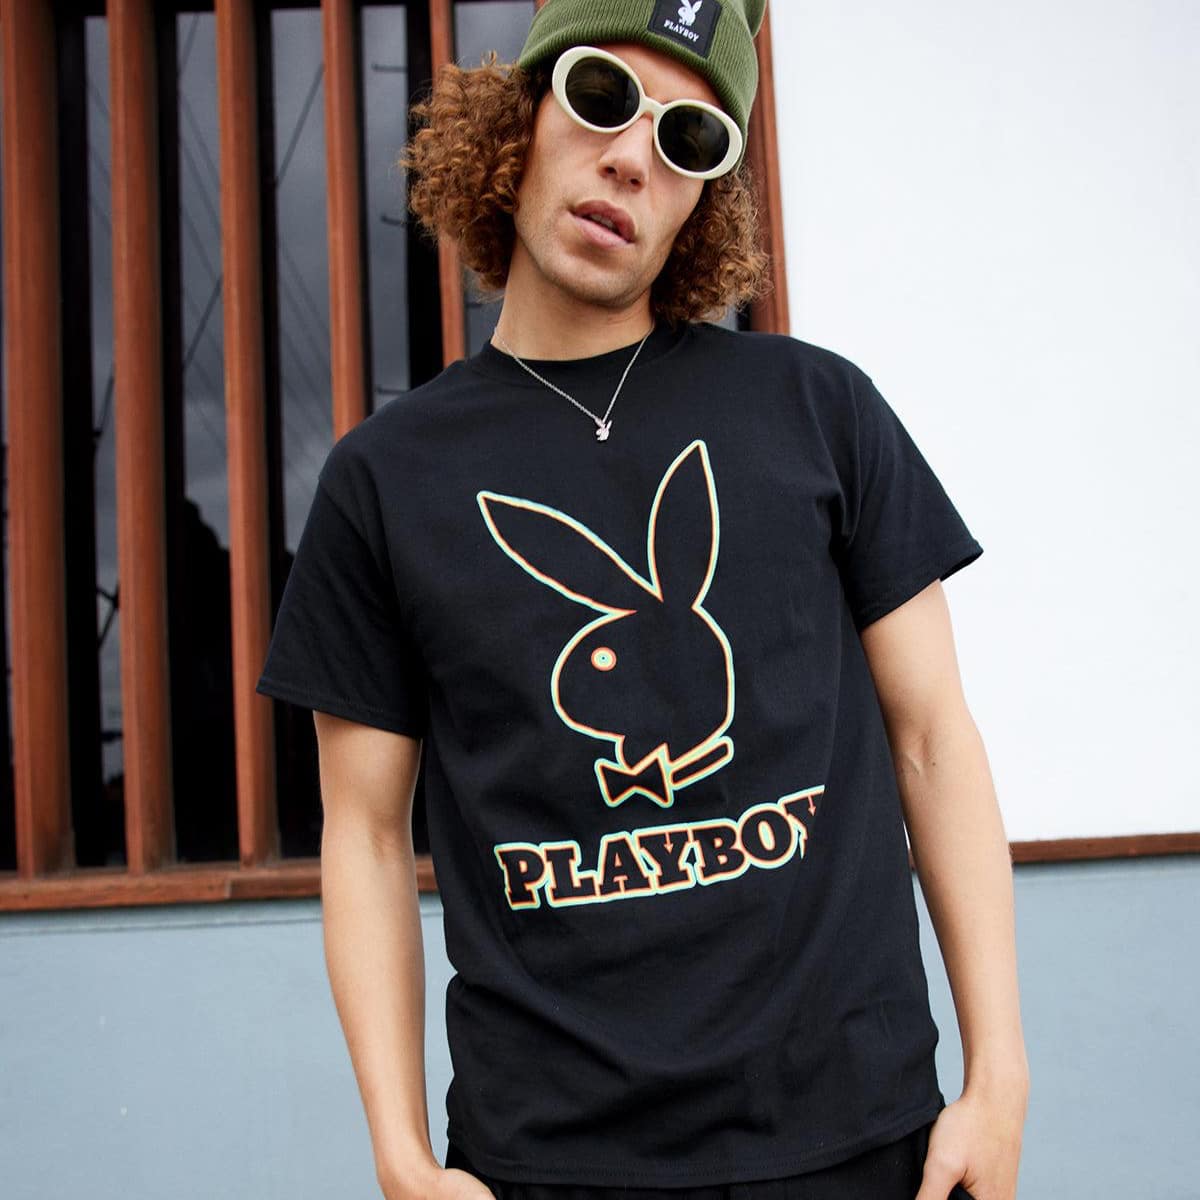 Playboy Outline Graphic Tee